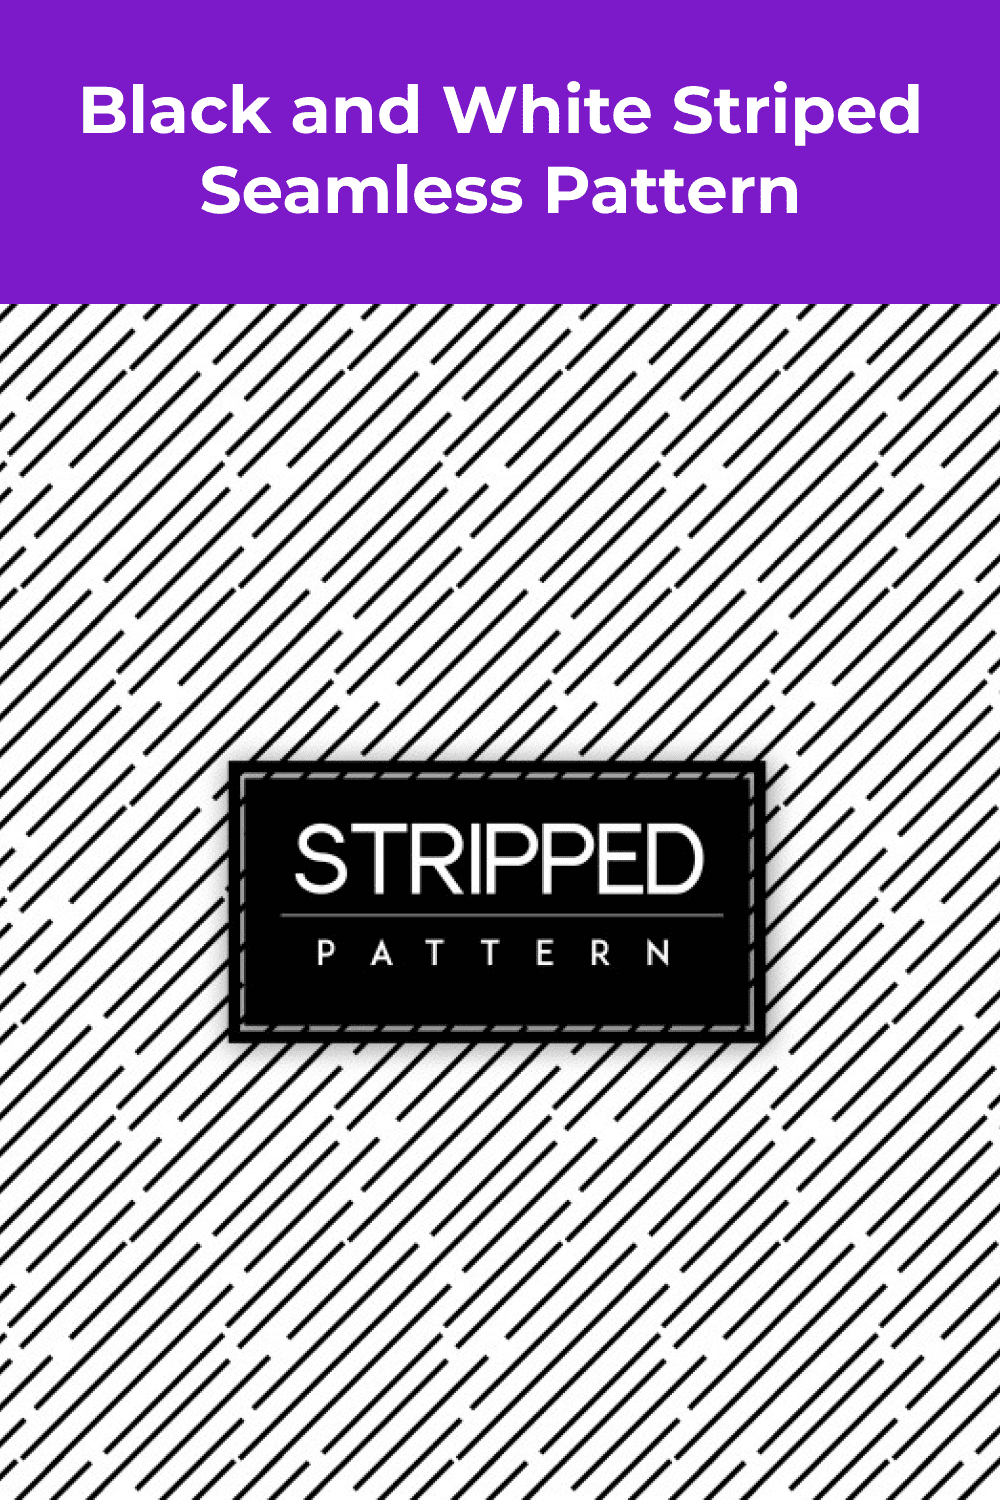 Black and White Striped Seamless Pattern.